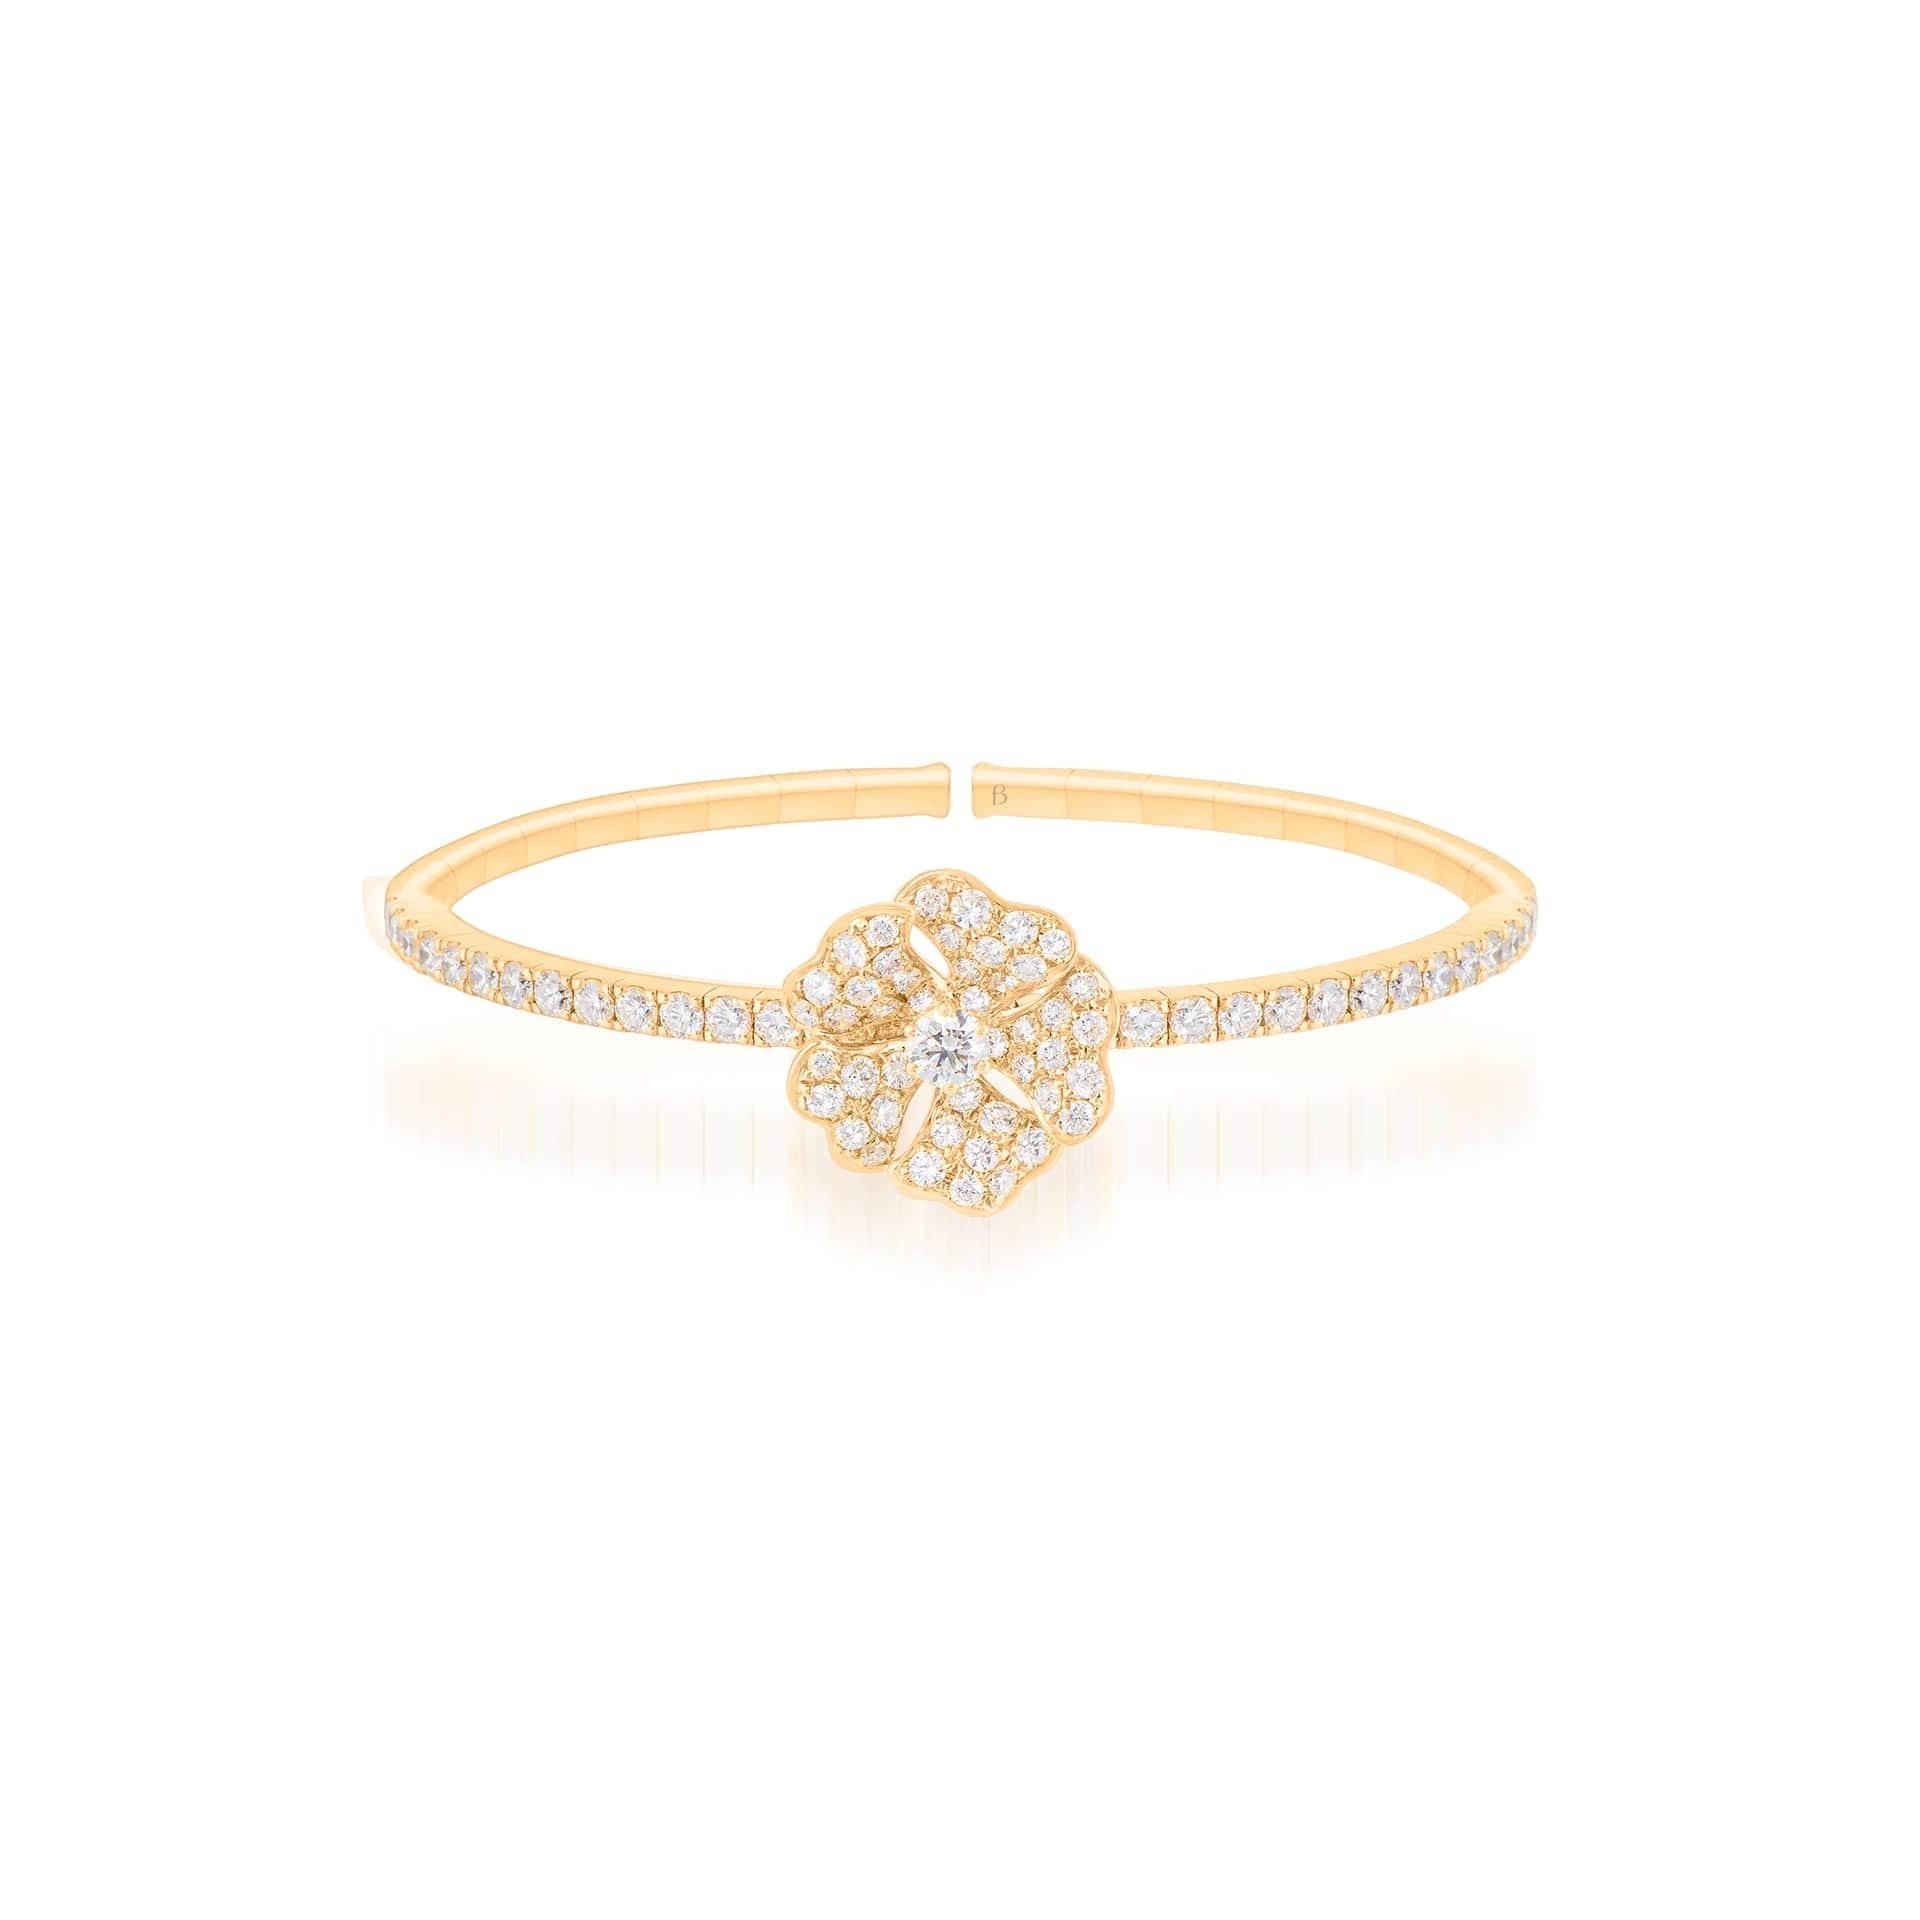 Bloom Diamond Solo Flower Bangle in 18K Yellow Gold

Inspired by the exquisite petals of the alpine cinquefoil flower, the Bloom collection combines the richness of diamonds and precious metals with the light versatility of this delicate,